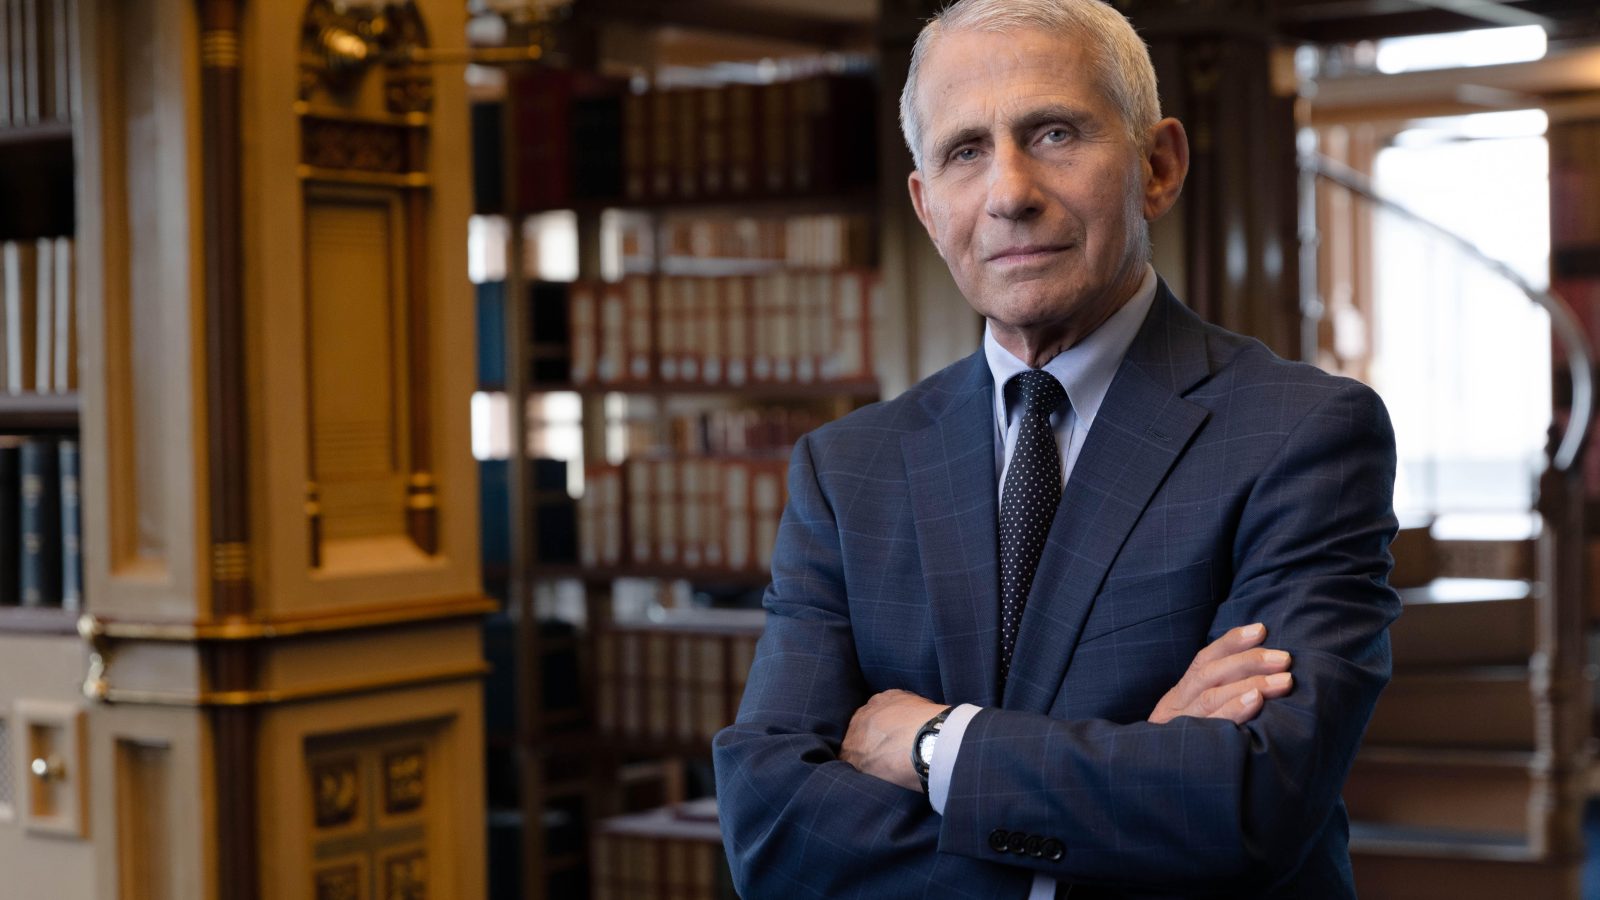 Dr. Fauci in Riggs Library